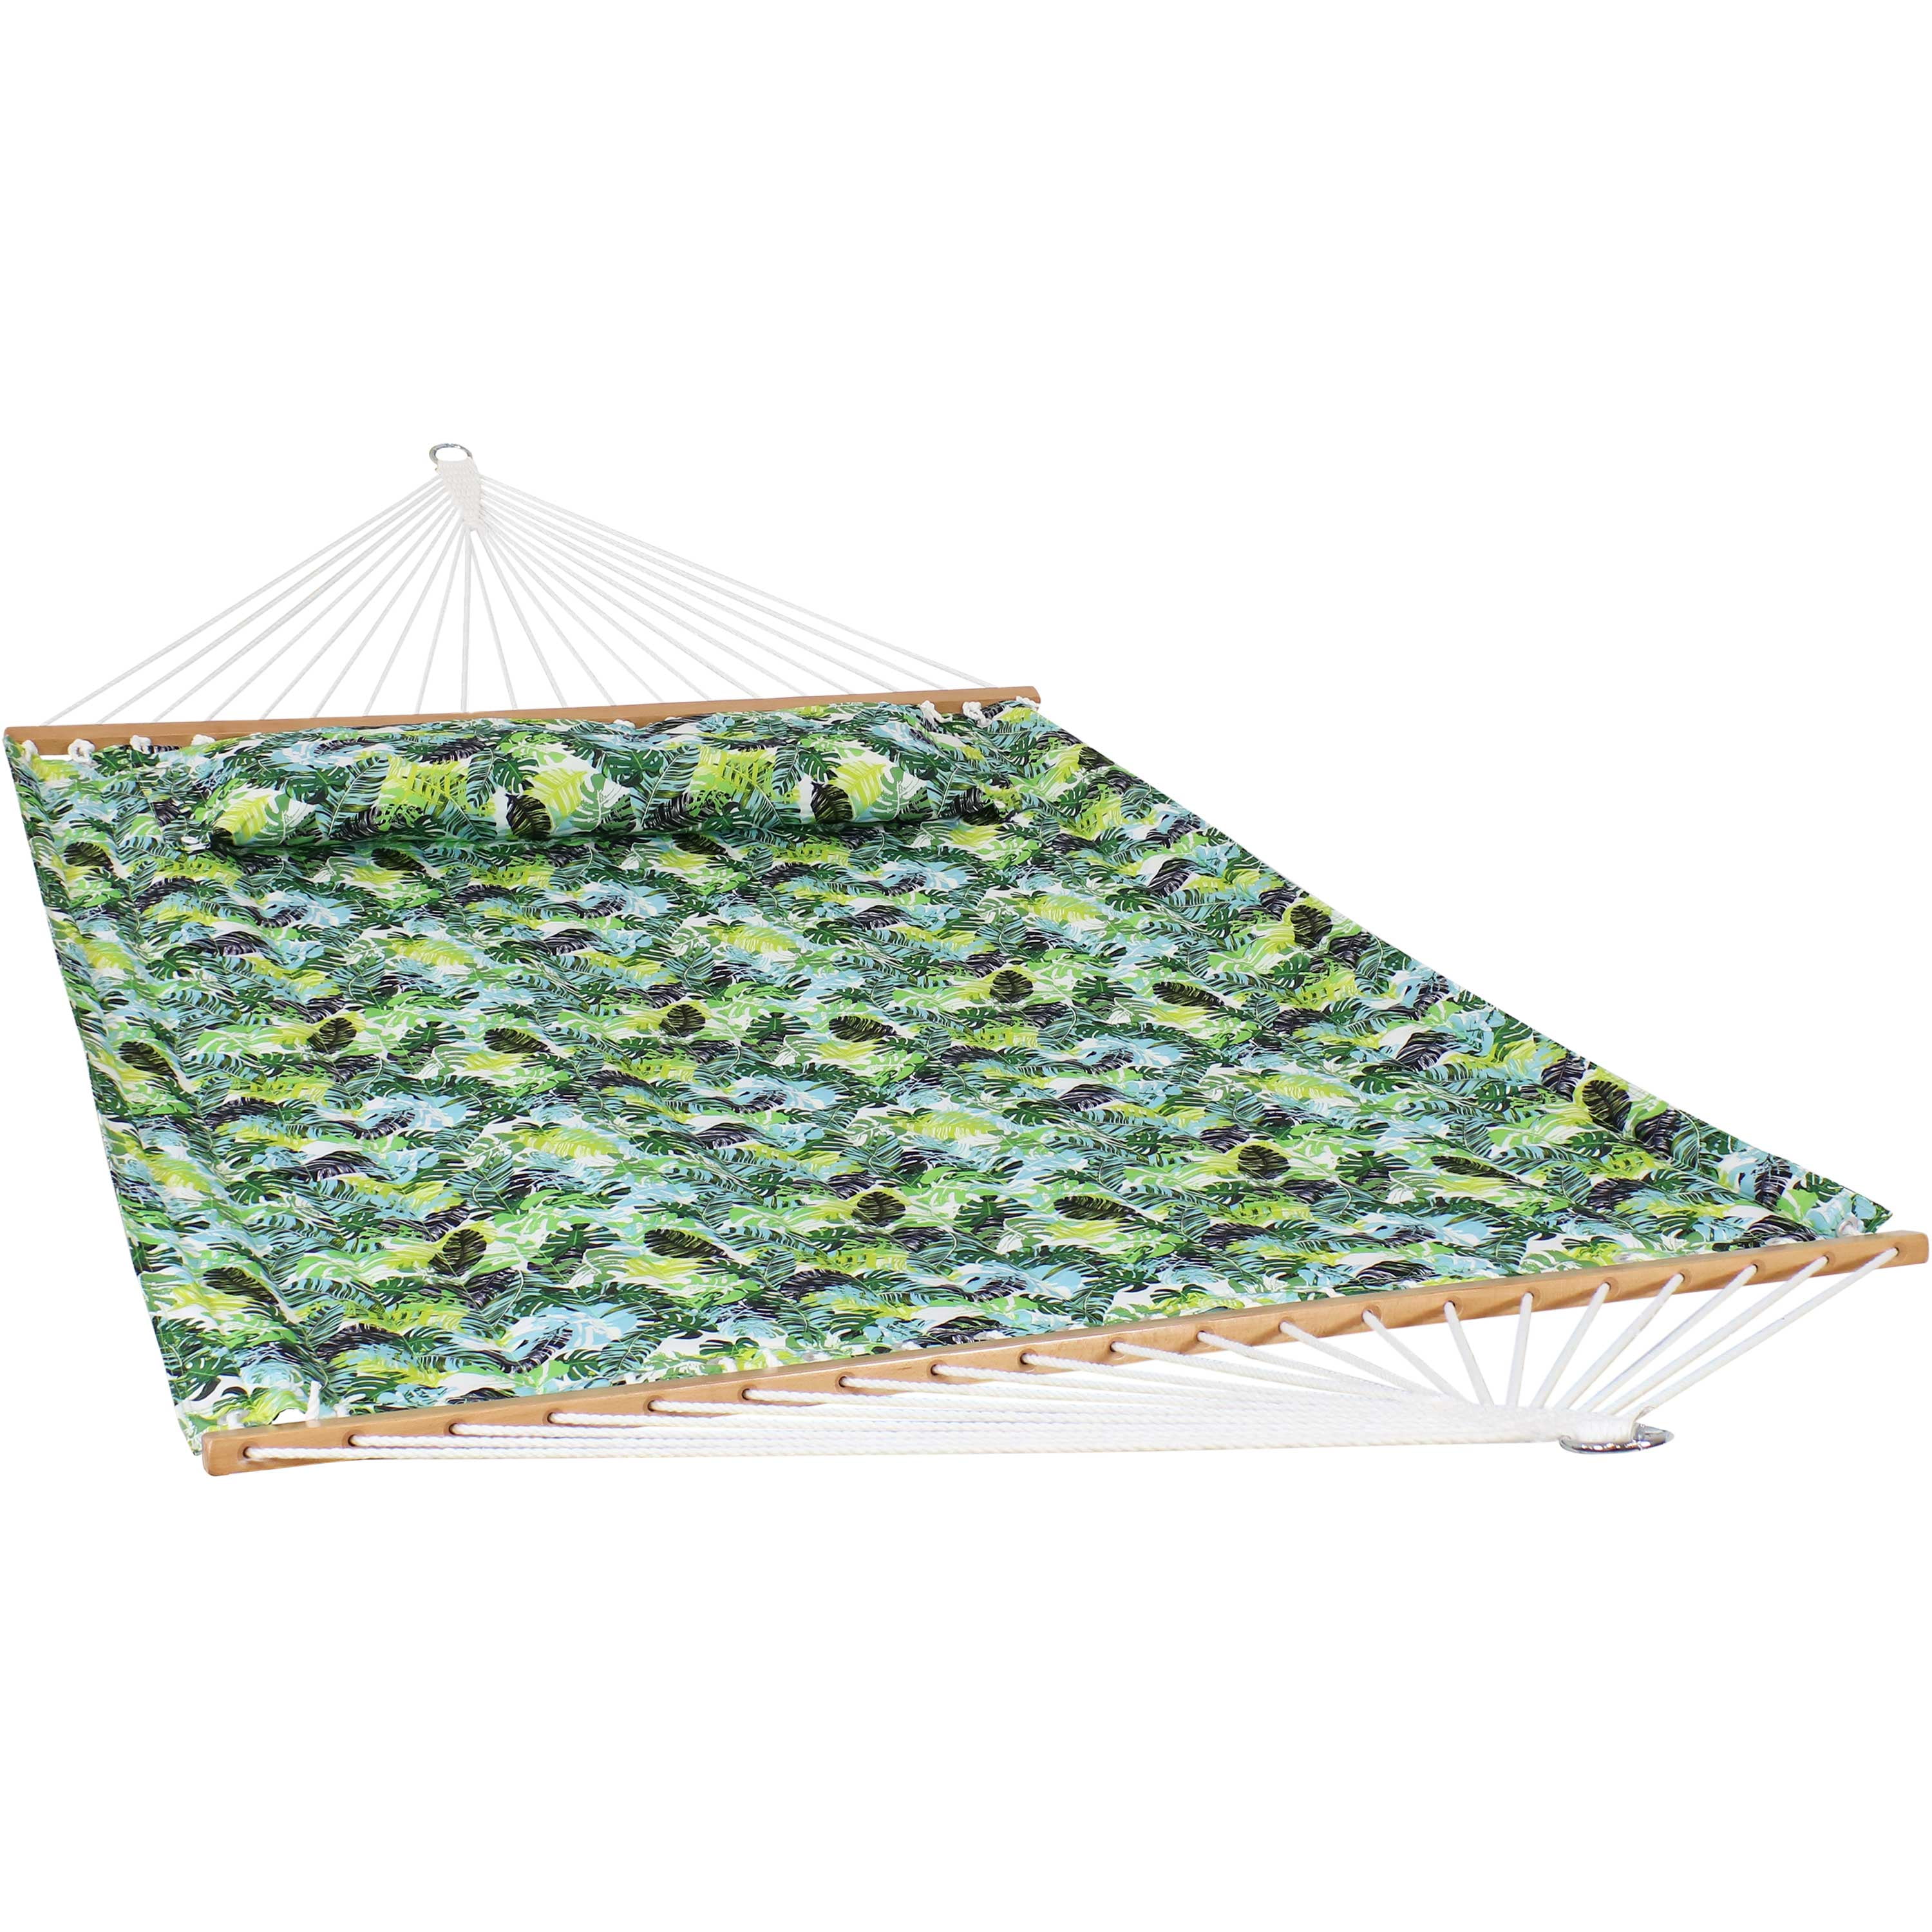 Sunnydaze 2-Person Quilted Printed Fabric Spreader Bar Hammock and Pillow -  Large Modern Cloth Hammock with Metal S Hooks and Hanging Chains - Heavy 